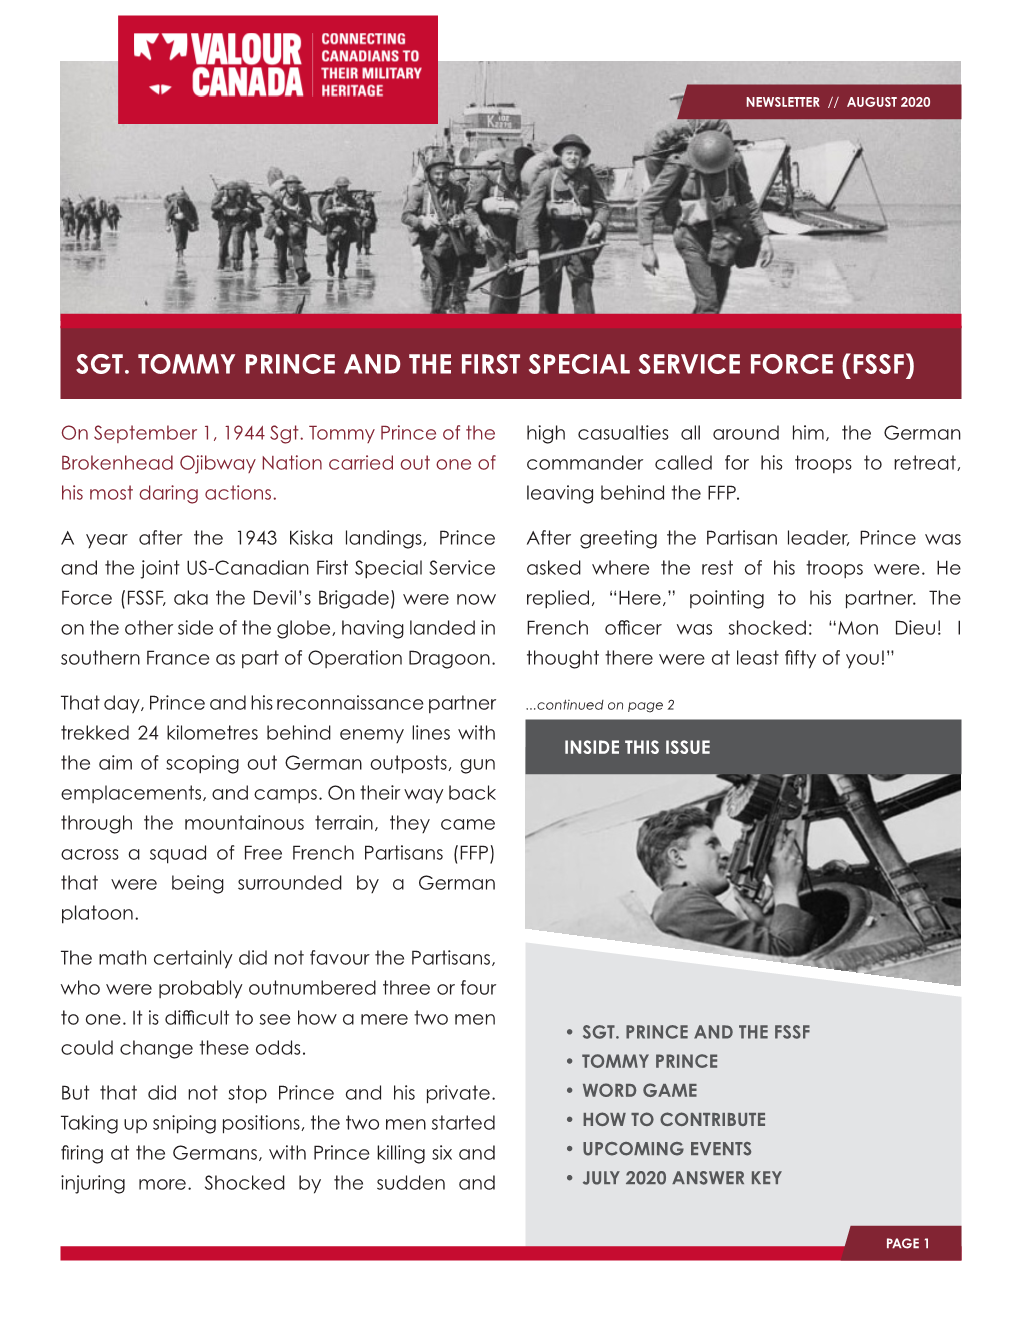 Sgt. Tommy Prince and the First Special Service Force (Fssf)